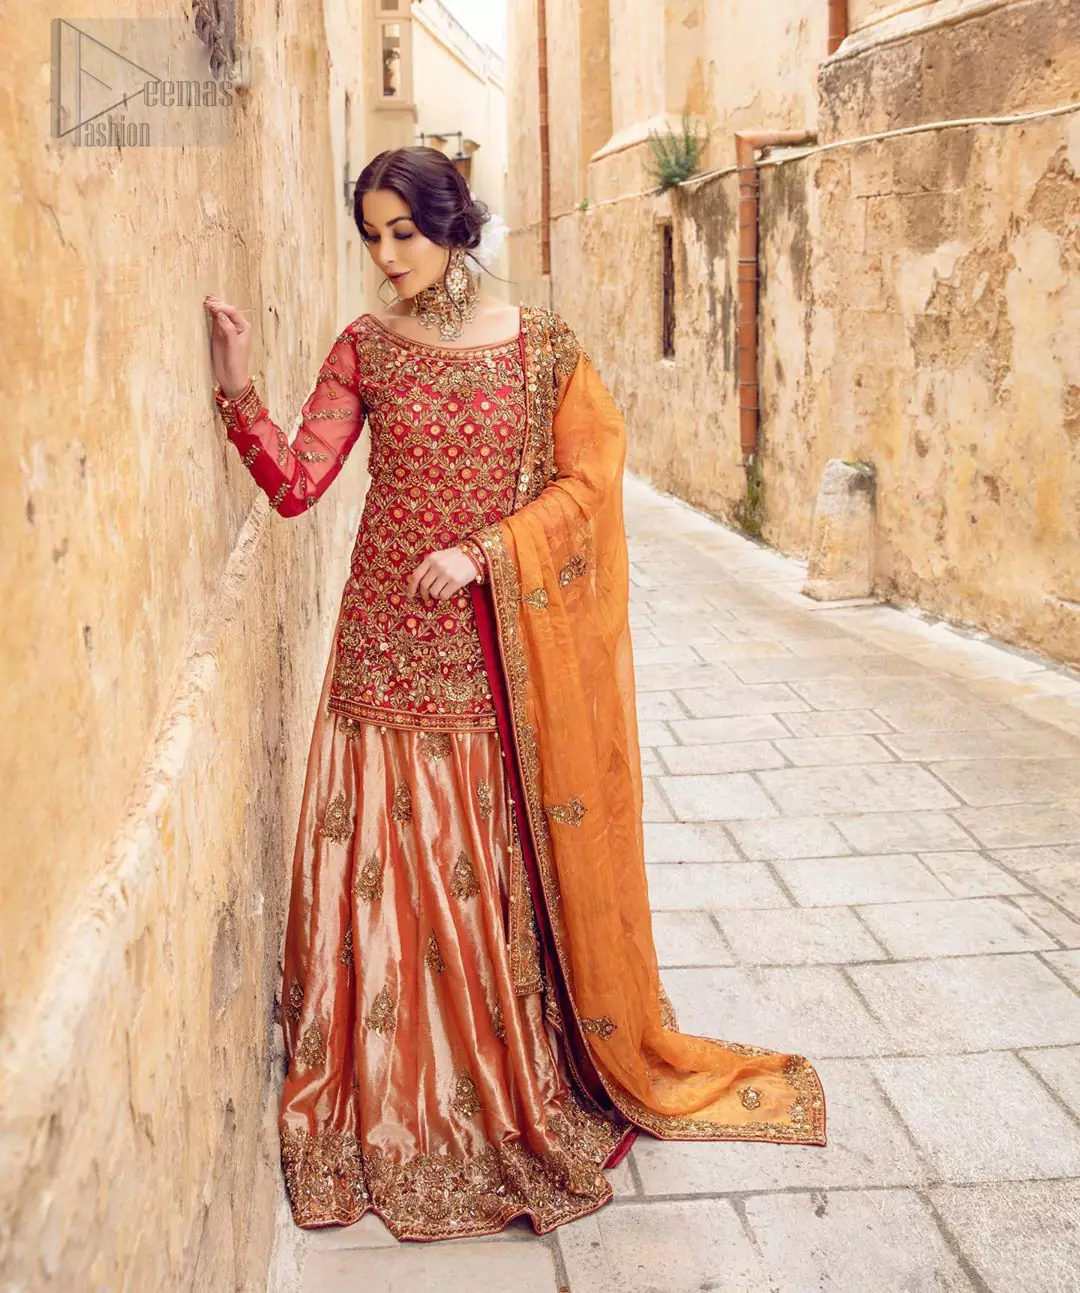 Make your big day more beautiful with our excessively embroidered back train lehenga shirt featuring delicately embellished neckline along with geometric patterns highlighted in antique shaded embroidery detailing and intricately embroidered borders that gives perfect ending to this outfit. Pair it up with a breathtaking back train lehenga with scattered motifs on the ground and embellished hemline. The orange organza dupatta with floral motifs and finishing all around the edges makes the look complete. The combination of orange with red is absolutely breathetaking.